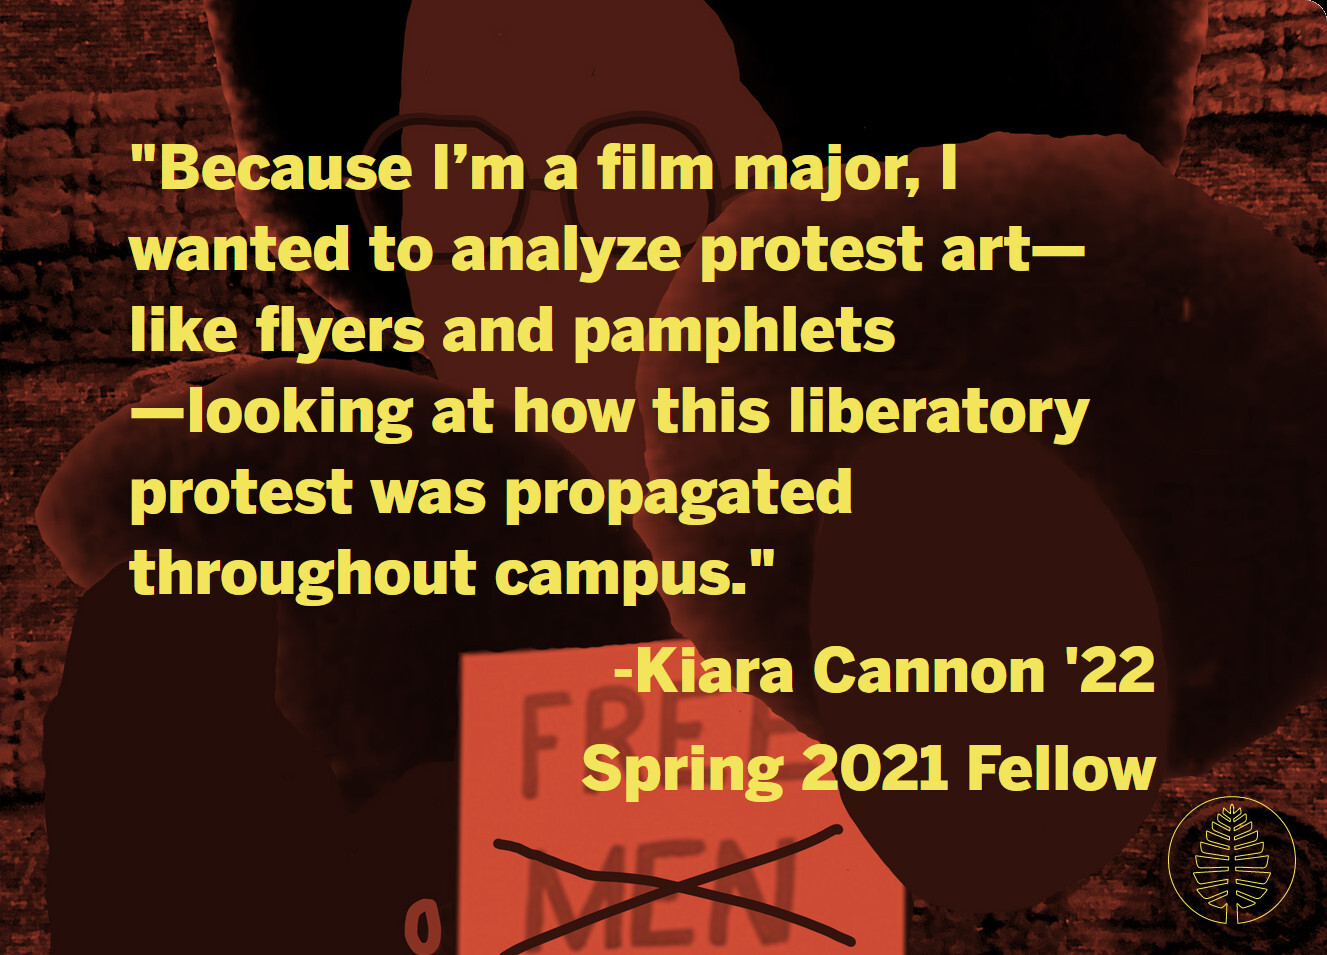 A quote against a background featuring part of one of the posters made by fellow Kiara Cannon '22, which shows illustrations of Black women's heads surrounding a sign that reads "FREE MEN ALL," with "MEN" crossed out. "Because I’m a film major, I wanted to analyze protest art—like flyers and pamphlets—looking at how this liberatory protest was propagated throughout campus." -Kiara Cannon '22, Spring 2021 Fellow